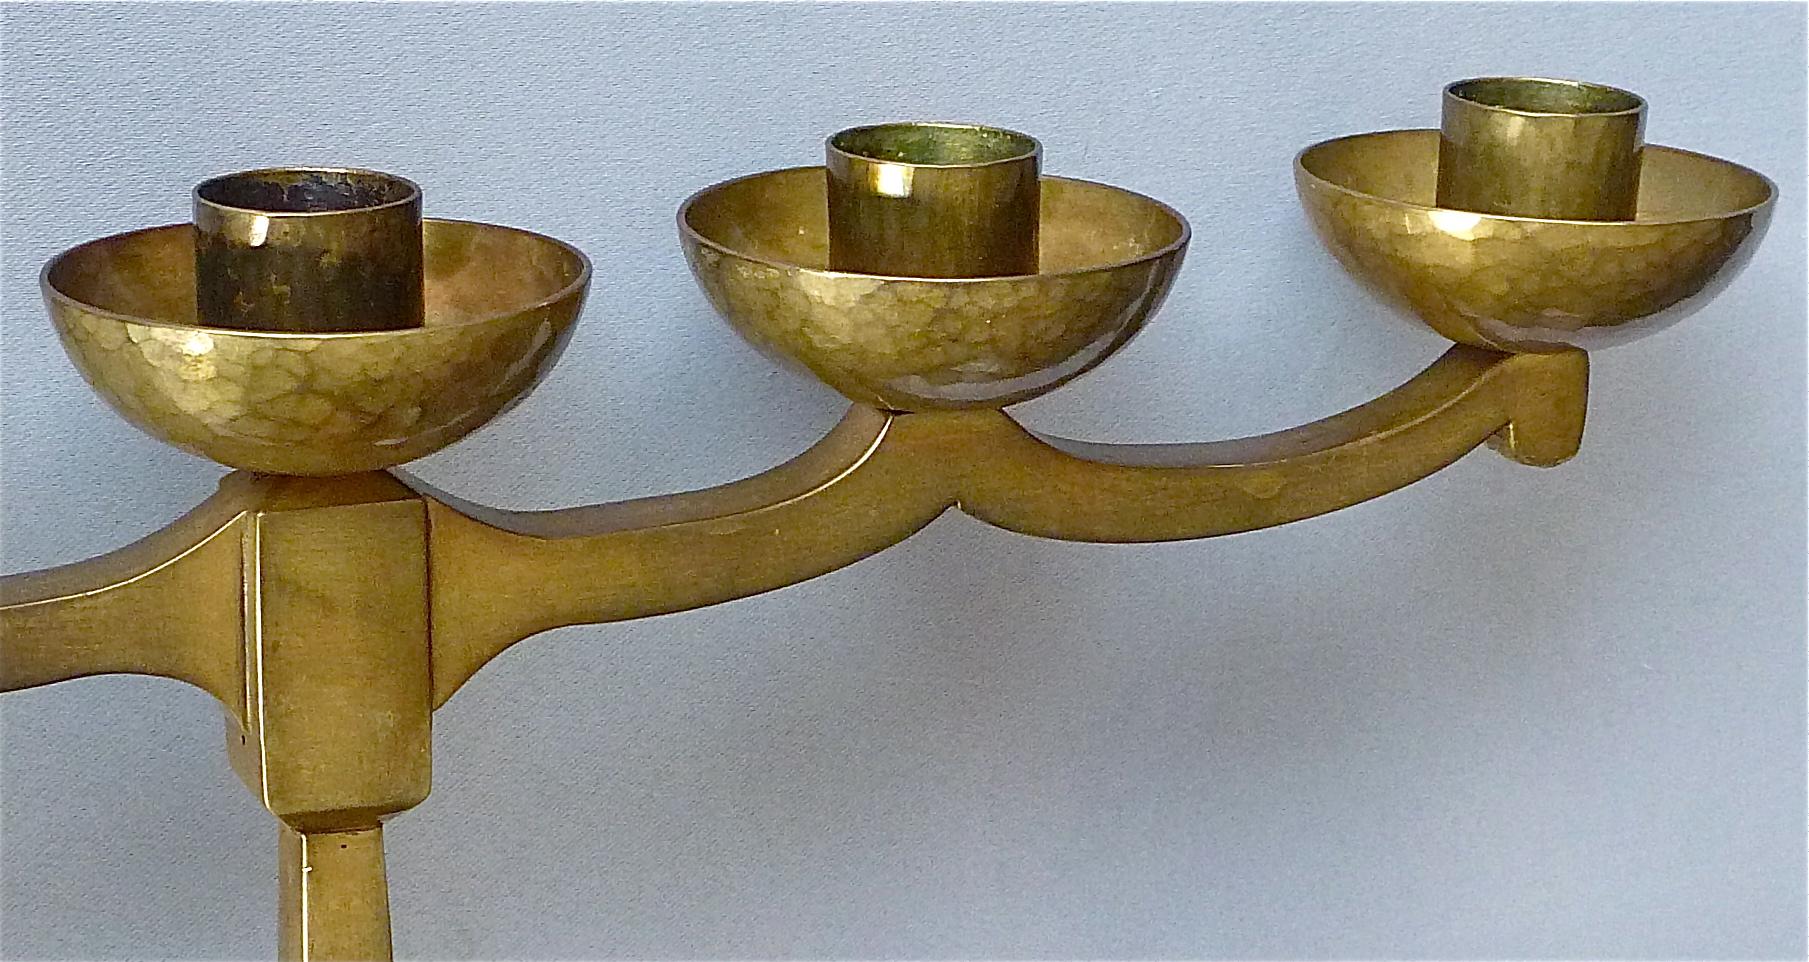 Hand-Chased Brass Bauhaus Art Deco Candle Holder Signed Bohde 1920s Candelabras For Sale 4